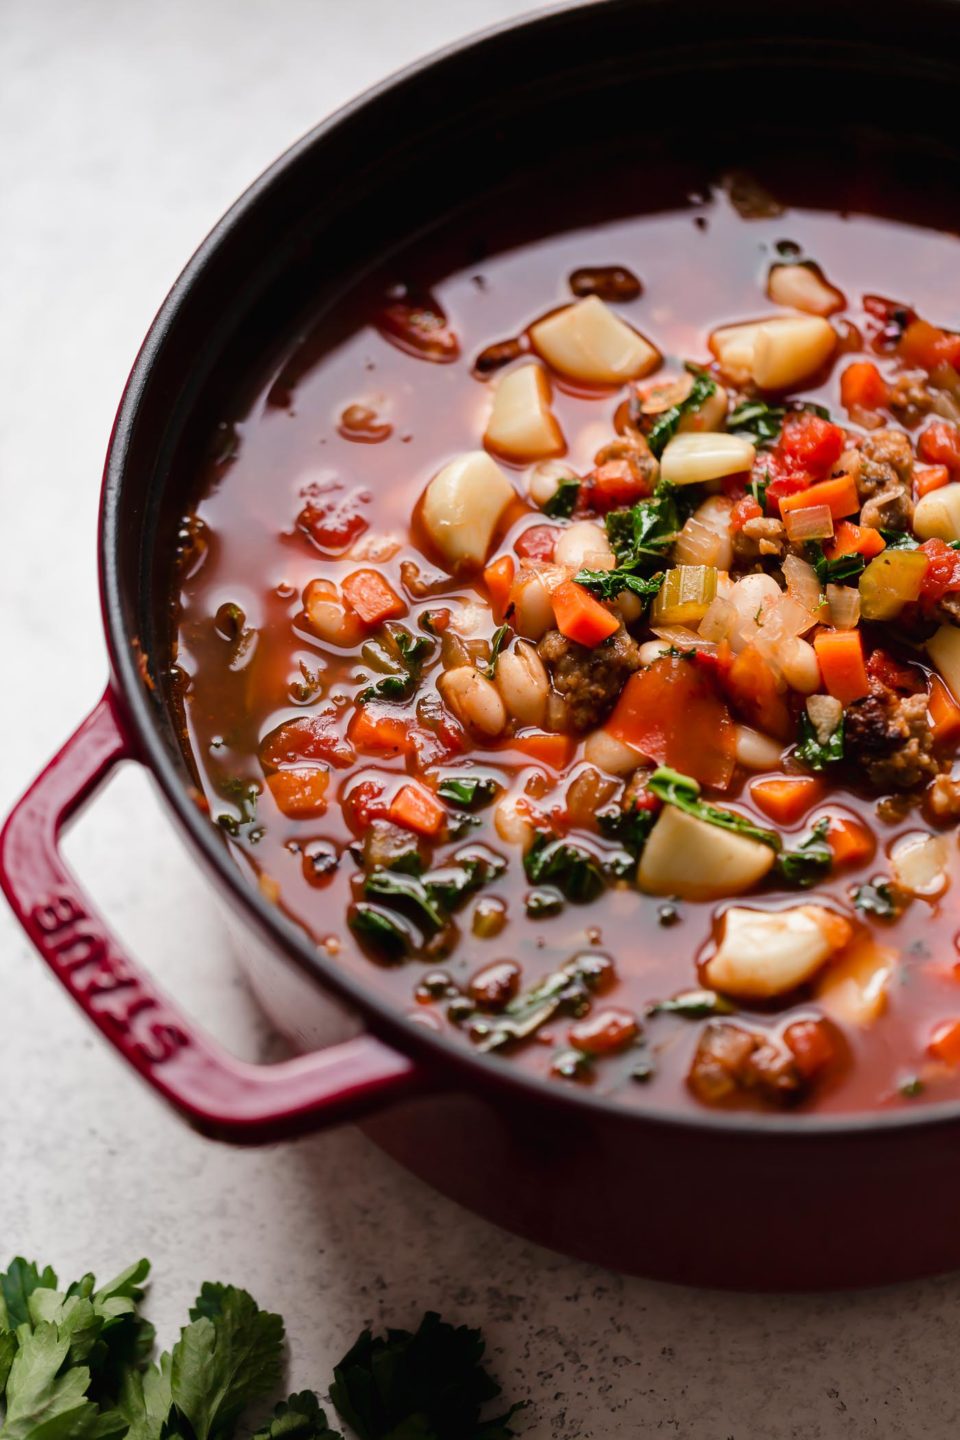 An side angle shot of a cherry red Staub cast iron dutch oven filled with a large batch of Hearty Minestrone Soup with Sausage. The dutch oven sits atop a creamy white textured surface. A bunch of fresh parsley rests alongside the dutch oven.